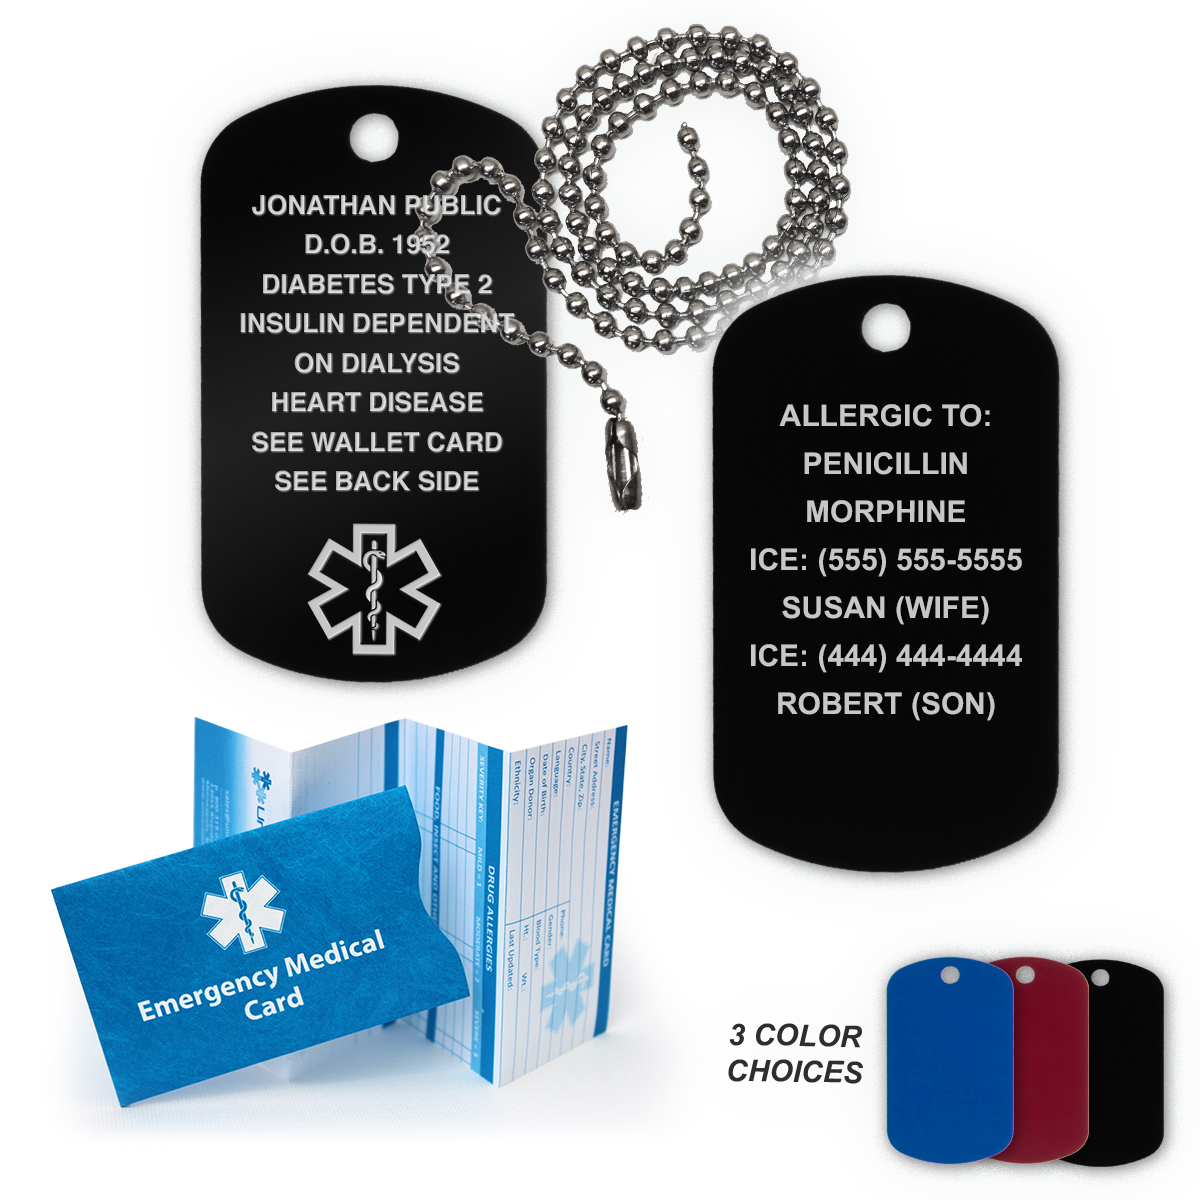 MEDICAL ALERT ALUMINUM DOG TAG NECKLACE FREE ENGRAVING DIABETIC ALLERGIES ICE 